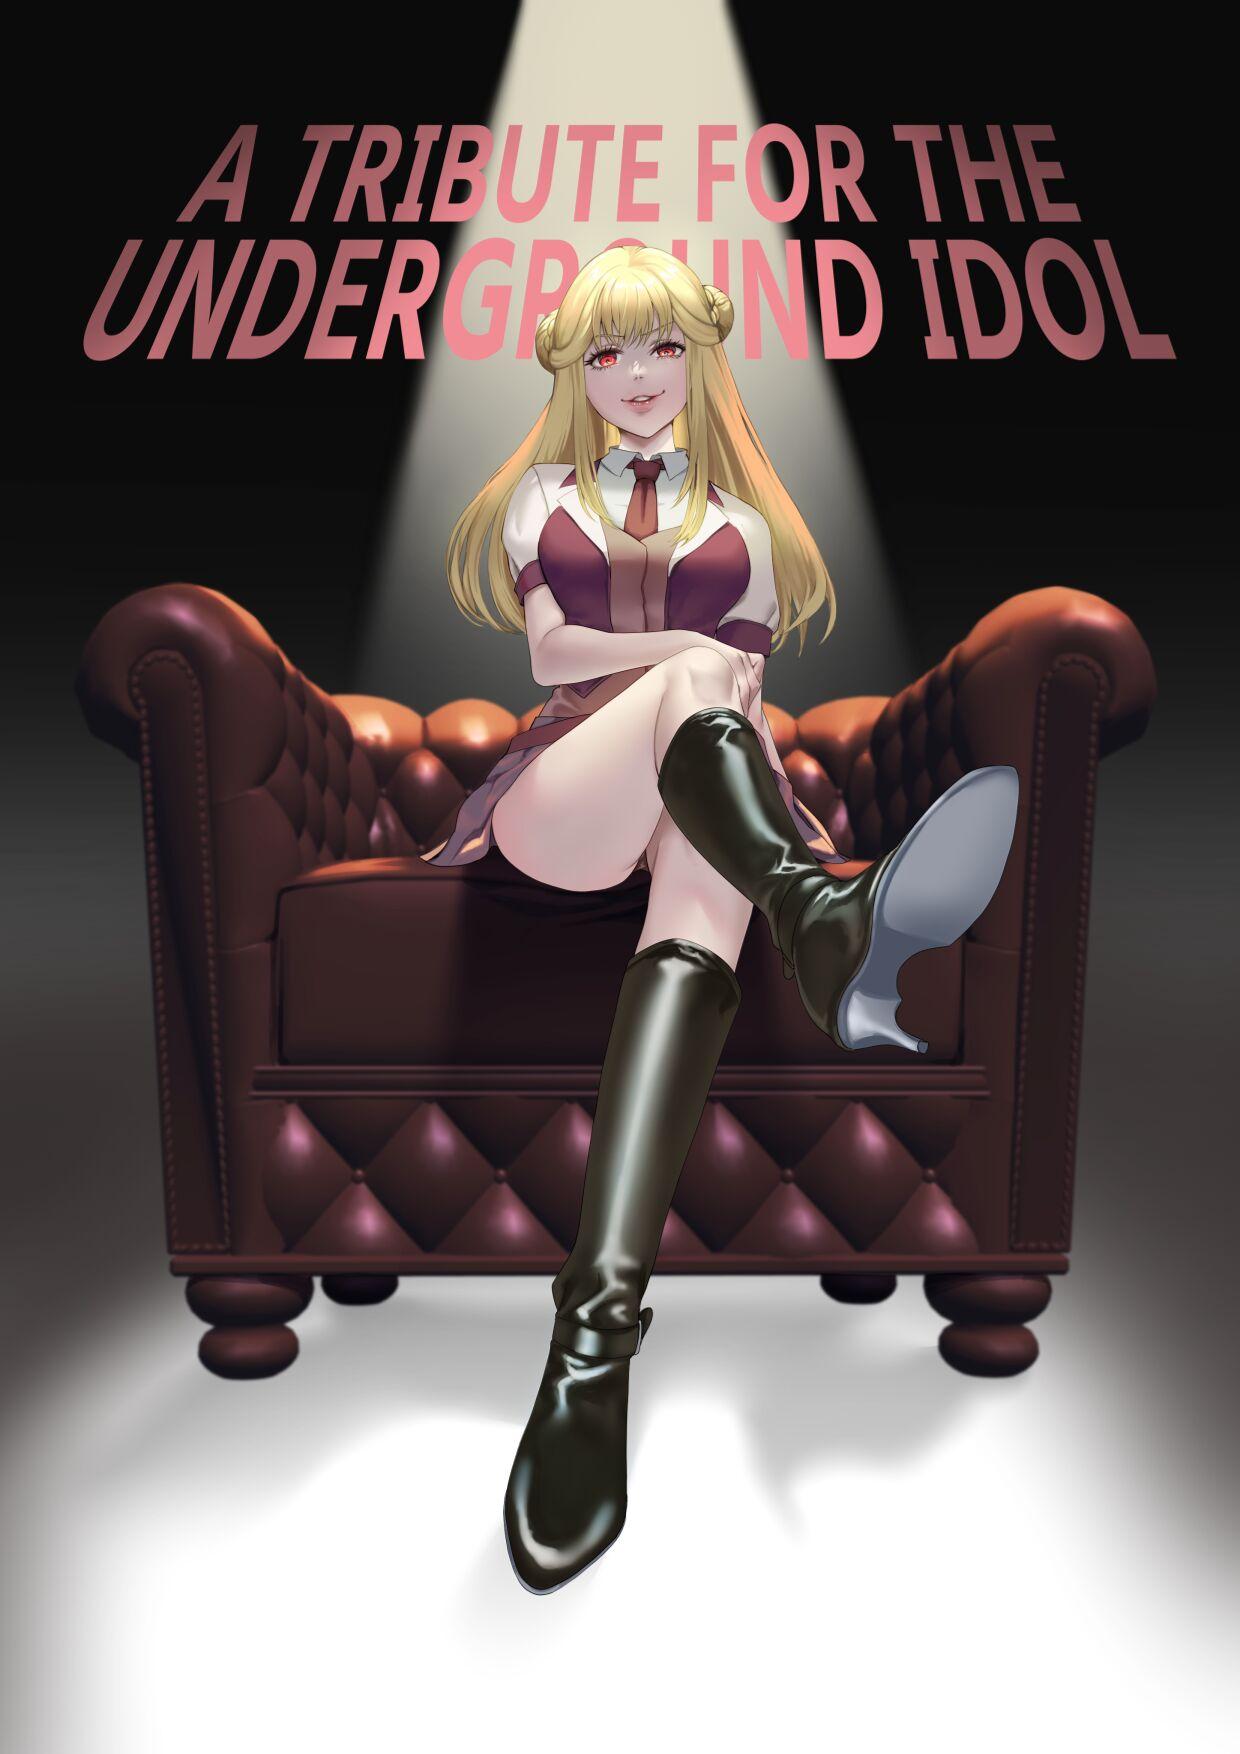 Socks Mitsugase Chika Idol  | A TRIBUTE FOR THE UNDERGROUND IDOL Exposed - Picture 1